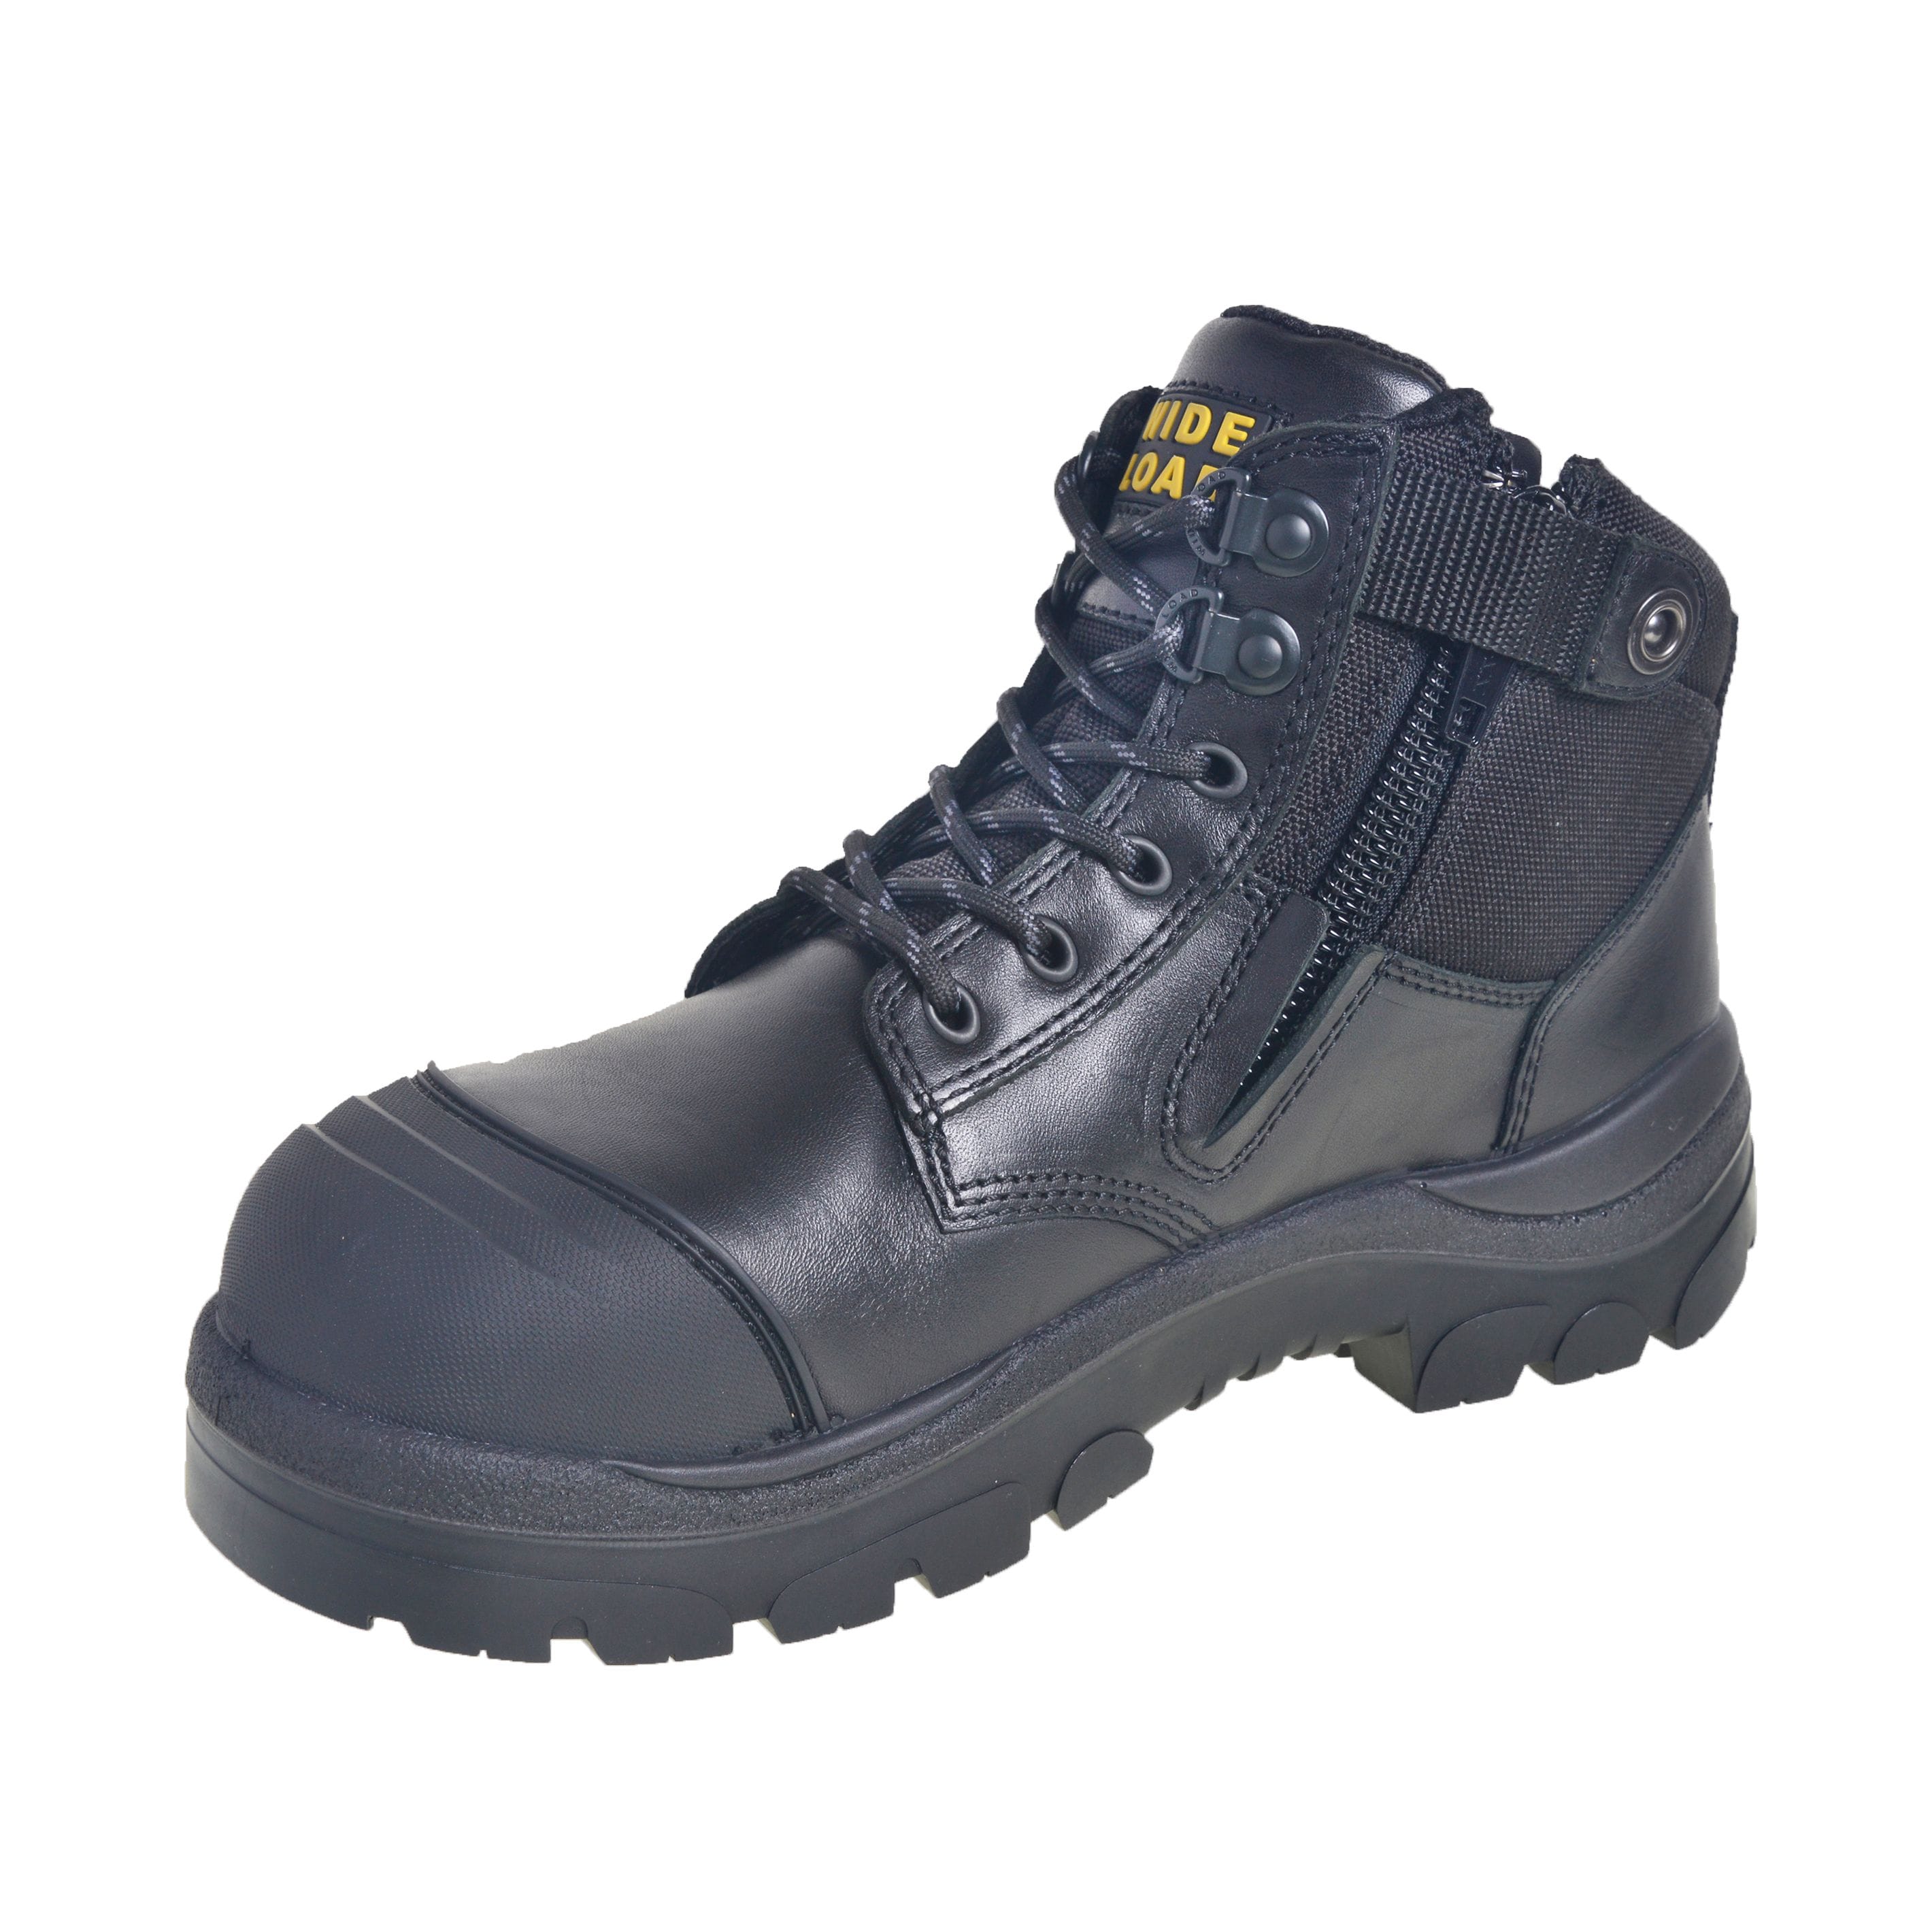 safety boots for wide feet